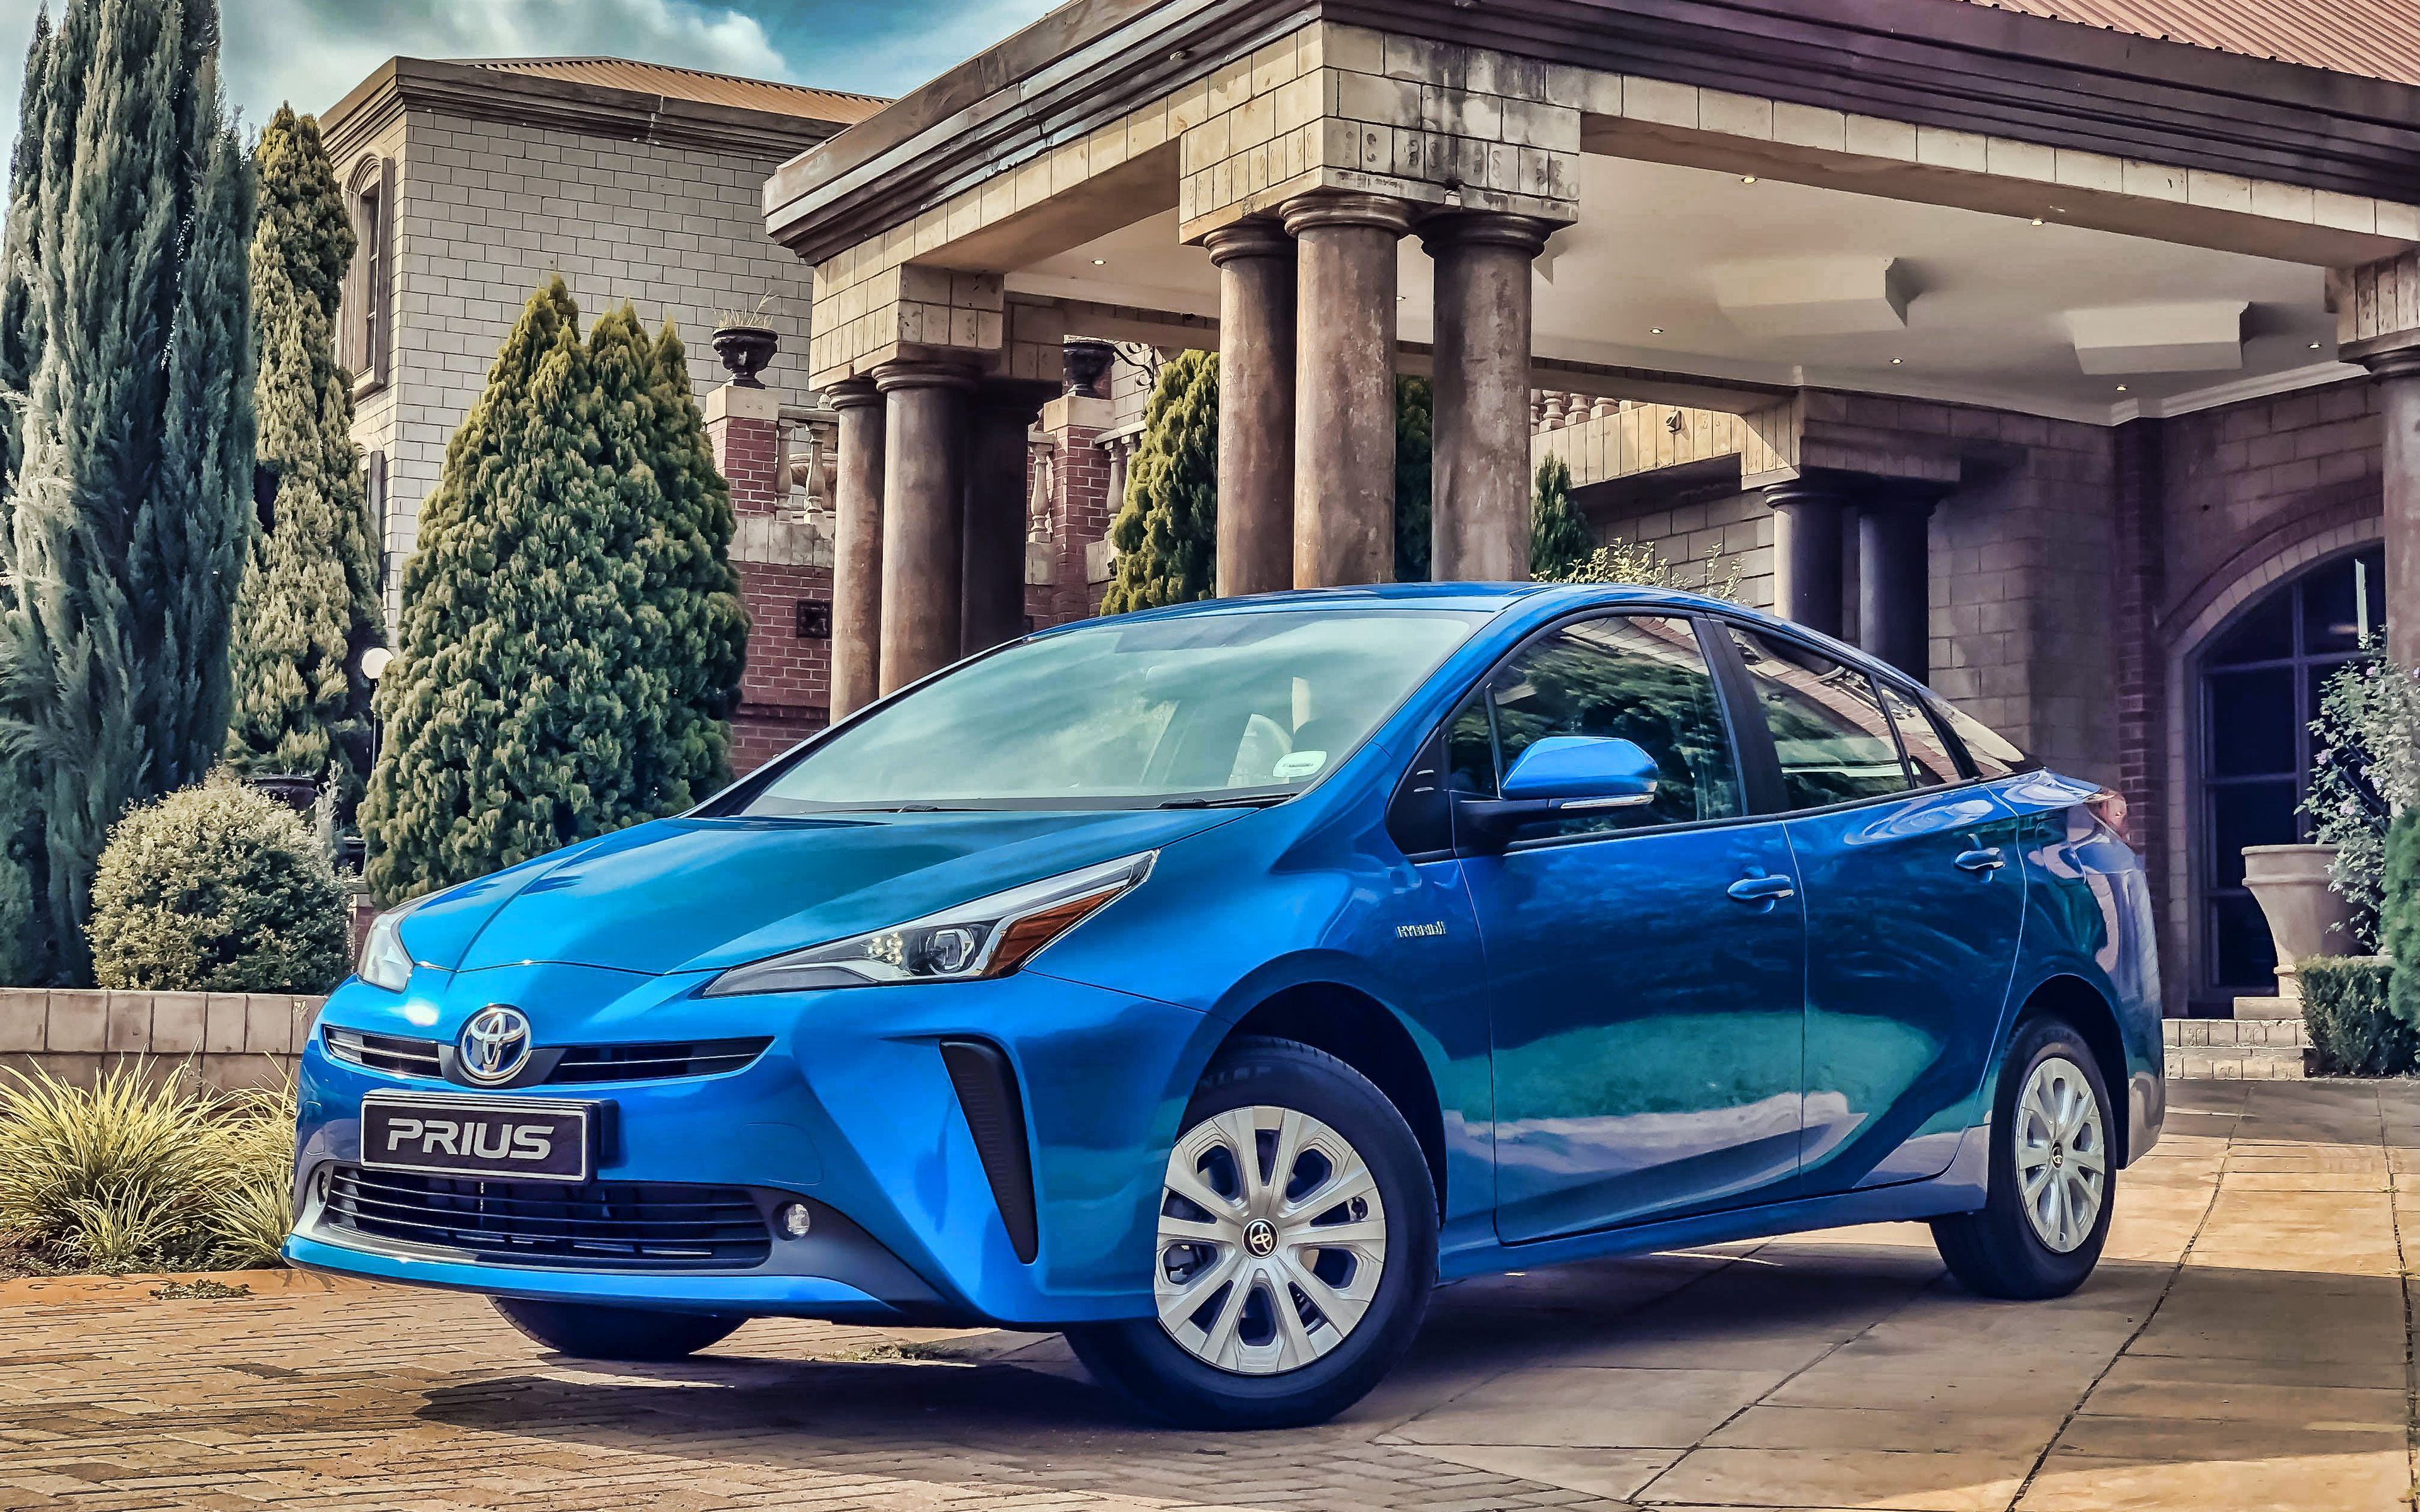 Download wallpaper Toyota Prius, 4k, hybrid cars, 2019 cars, new Prius, 2019 Toyota Prius, HDR, Blue Prius, japanese cars, Toyota for desktop with resolution 3840x2400. High Quality HD picture wallpaper